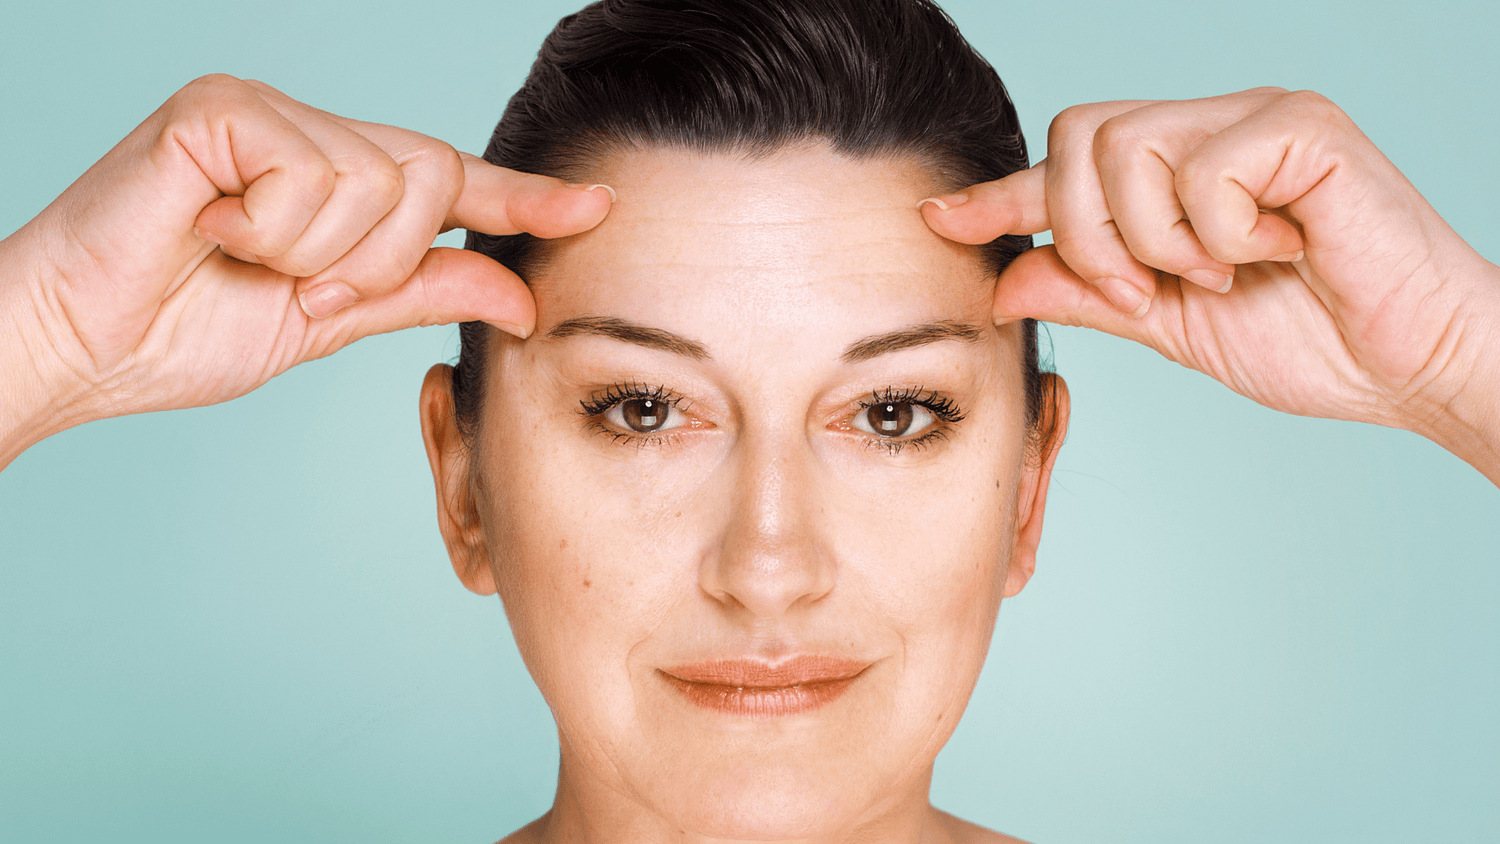 Expert-Recommended Home Remedies to Reduce Wrinkles and Look Younger